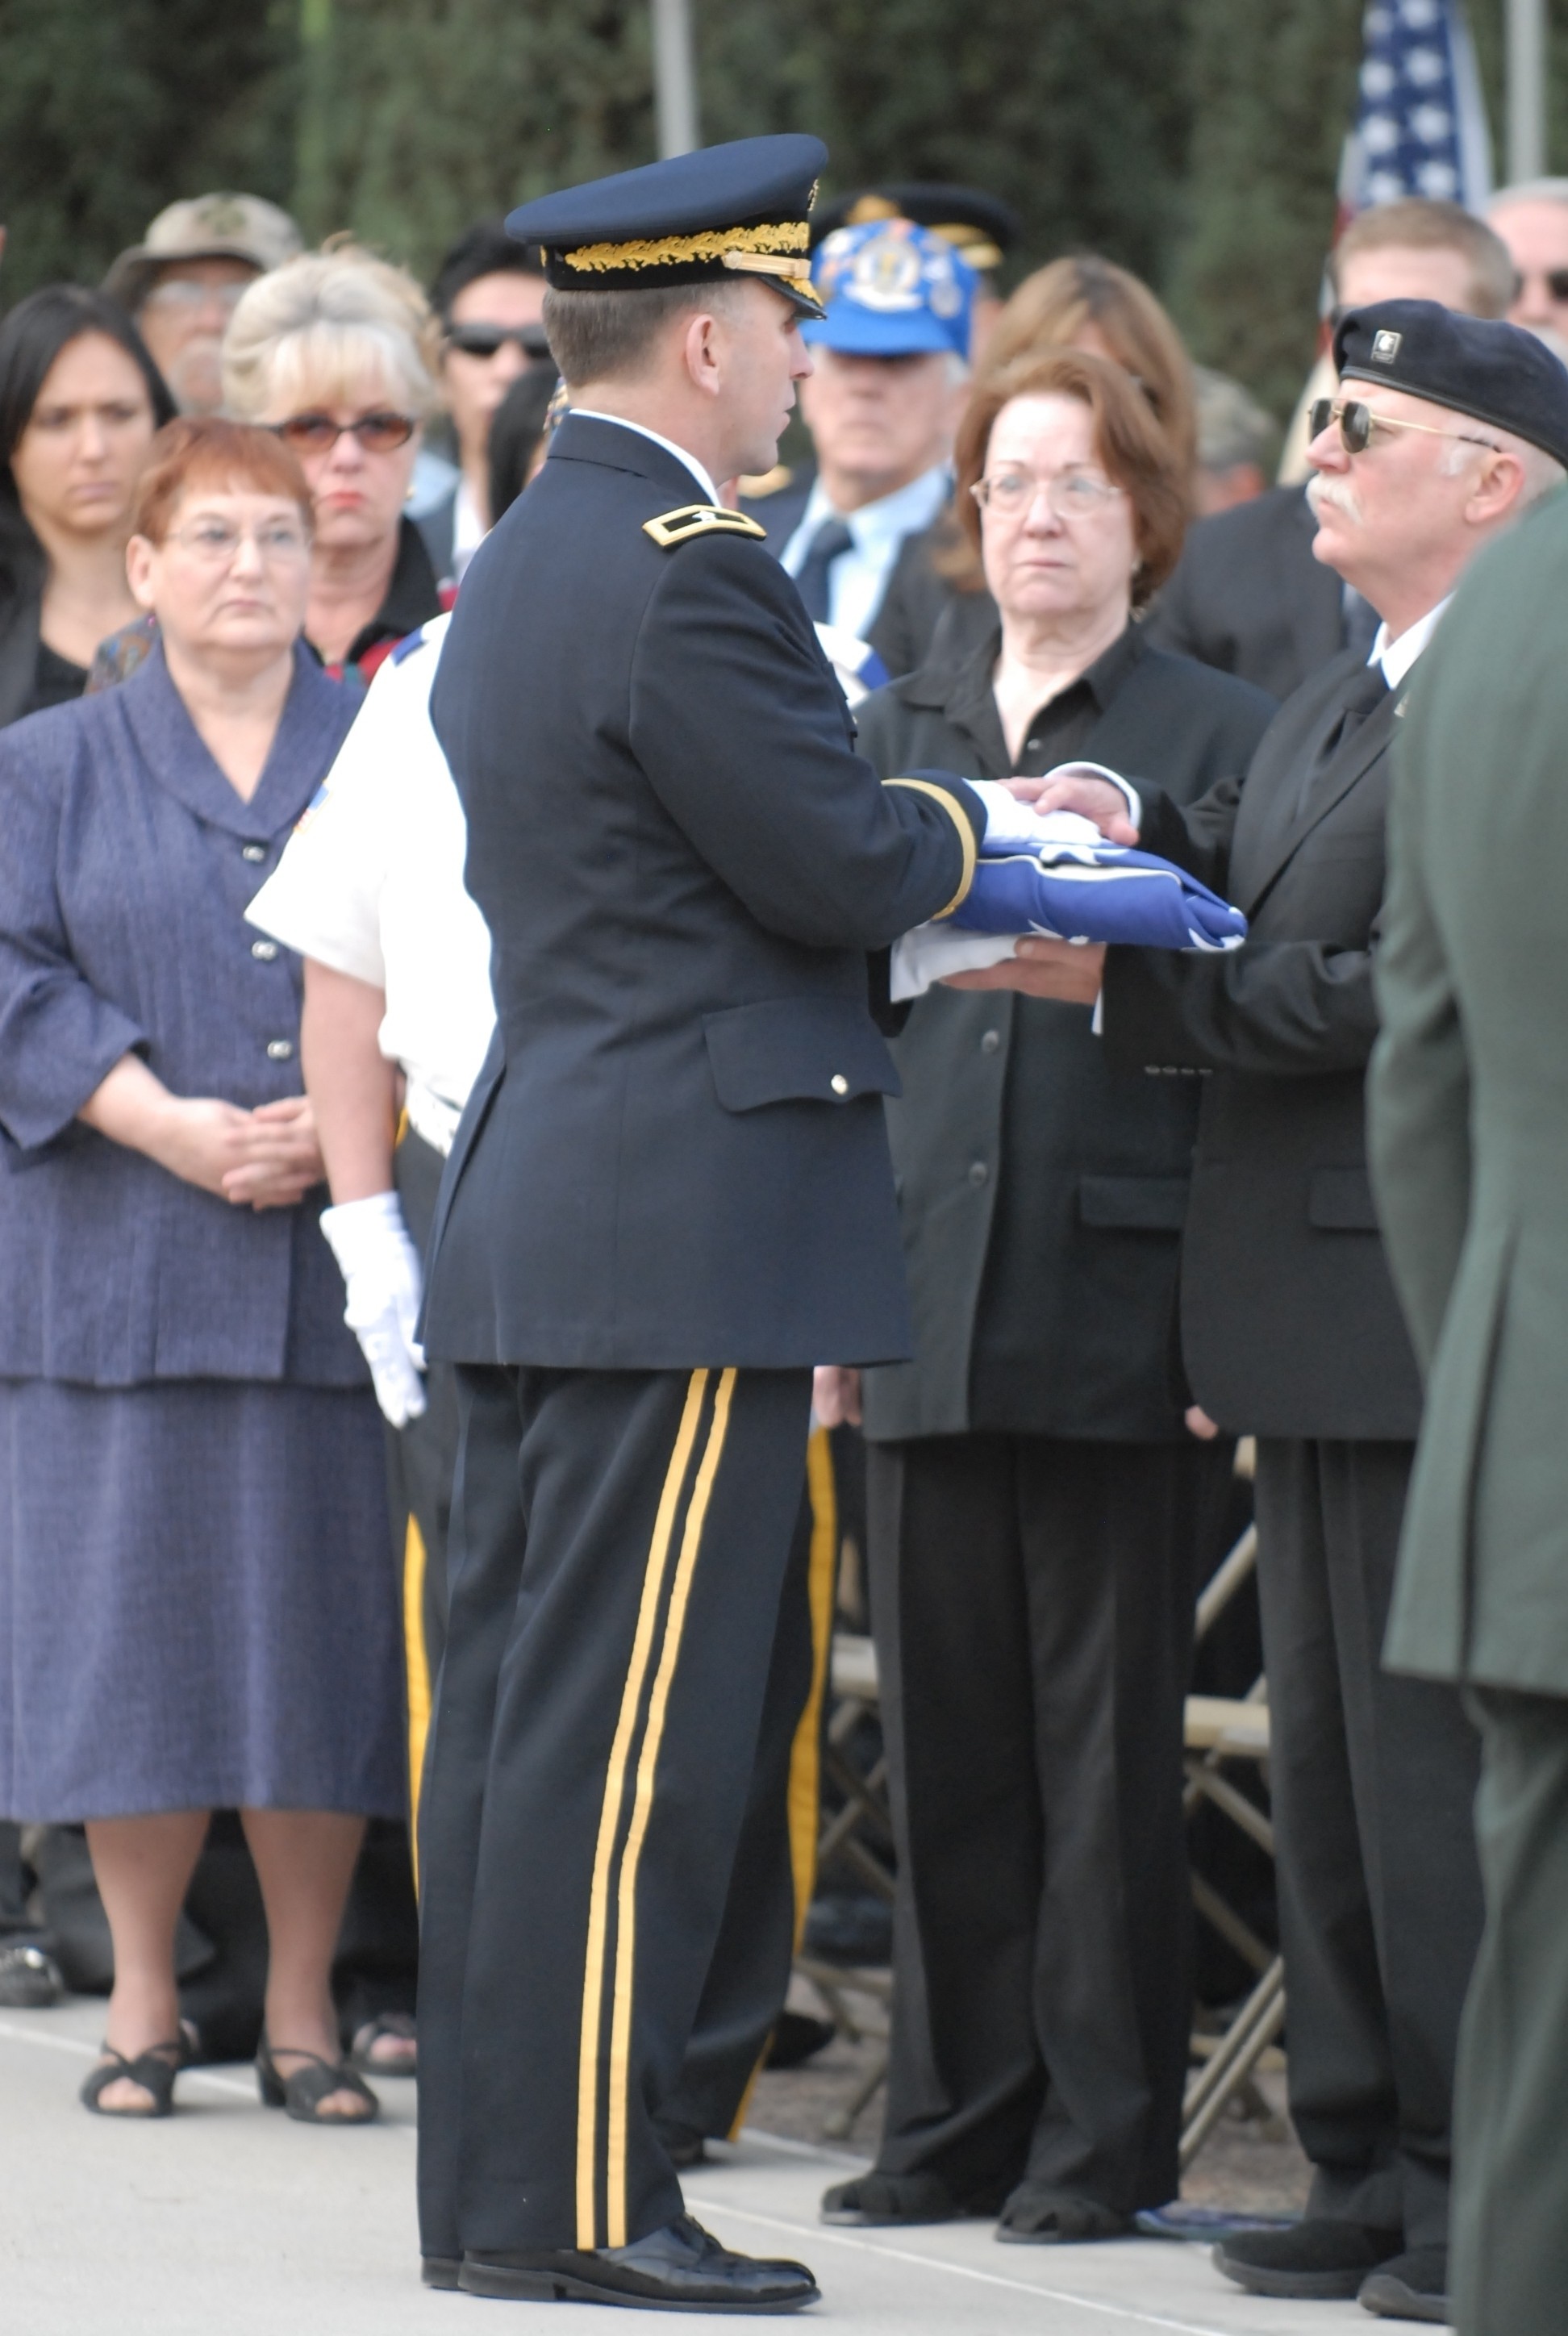 Medal of Honor recipient laid to rest | Article | The United